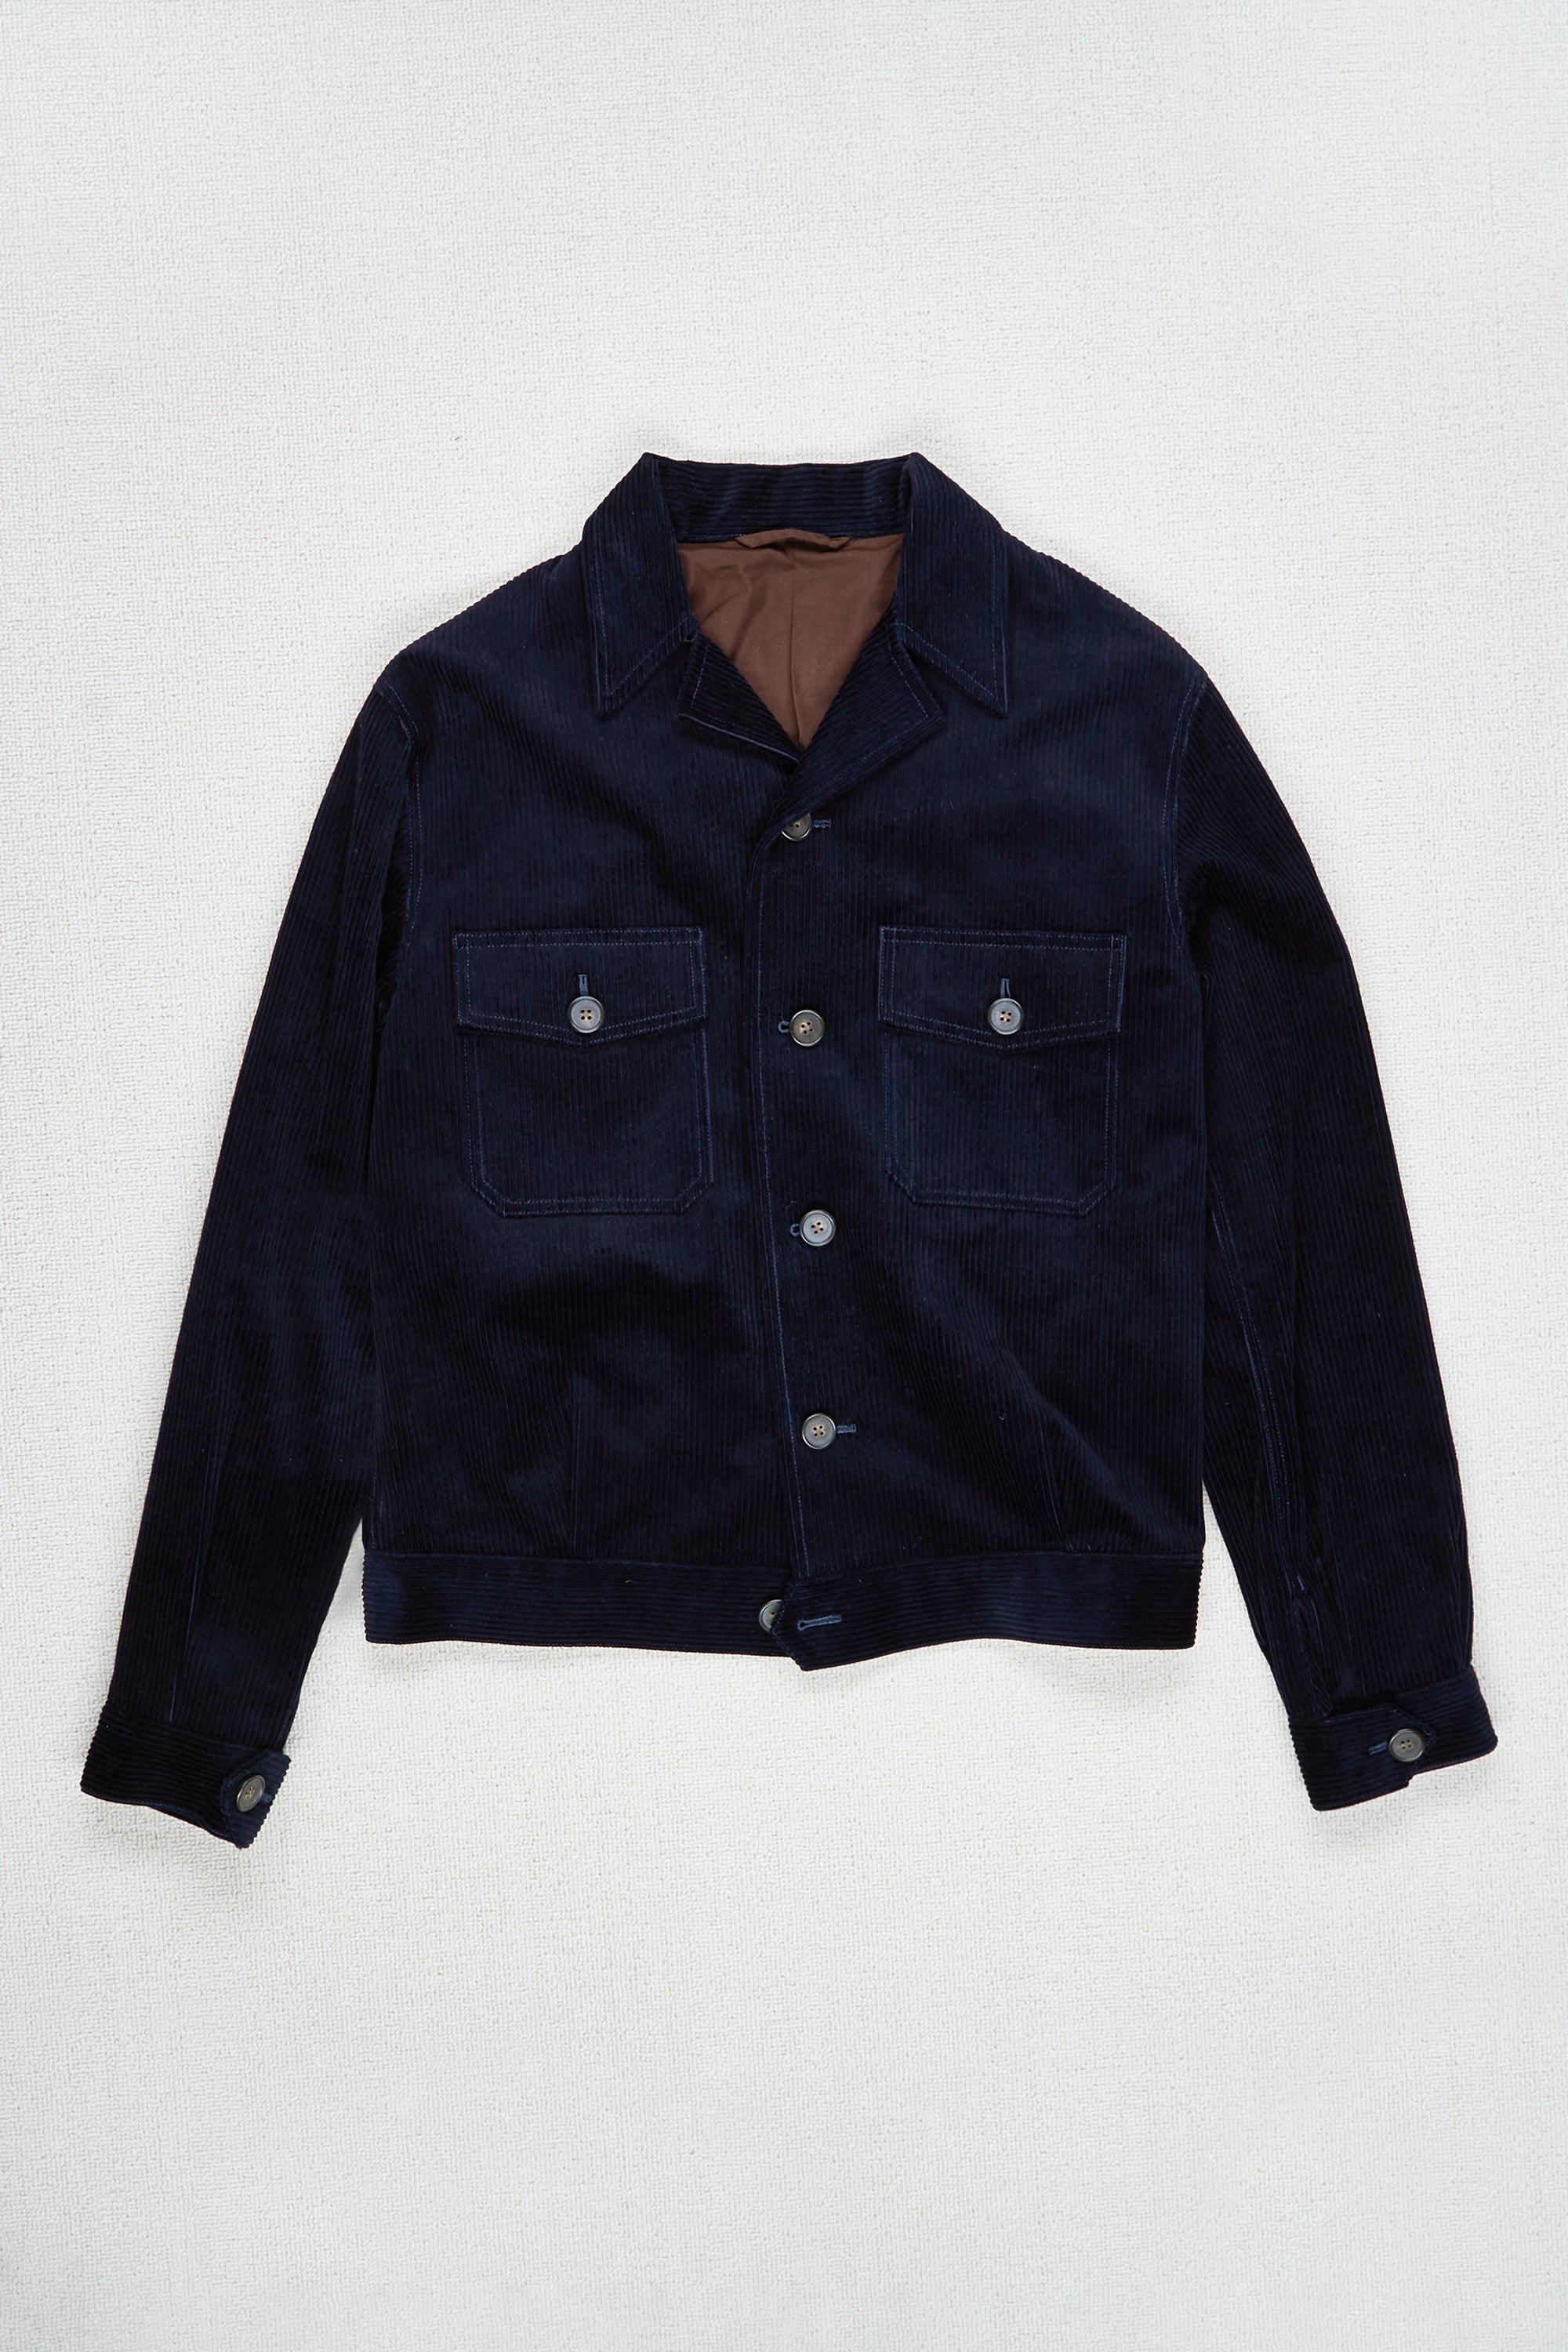 The Armoury 11-A011 Navy Corduroy Road Jacket